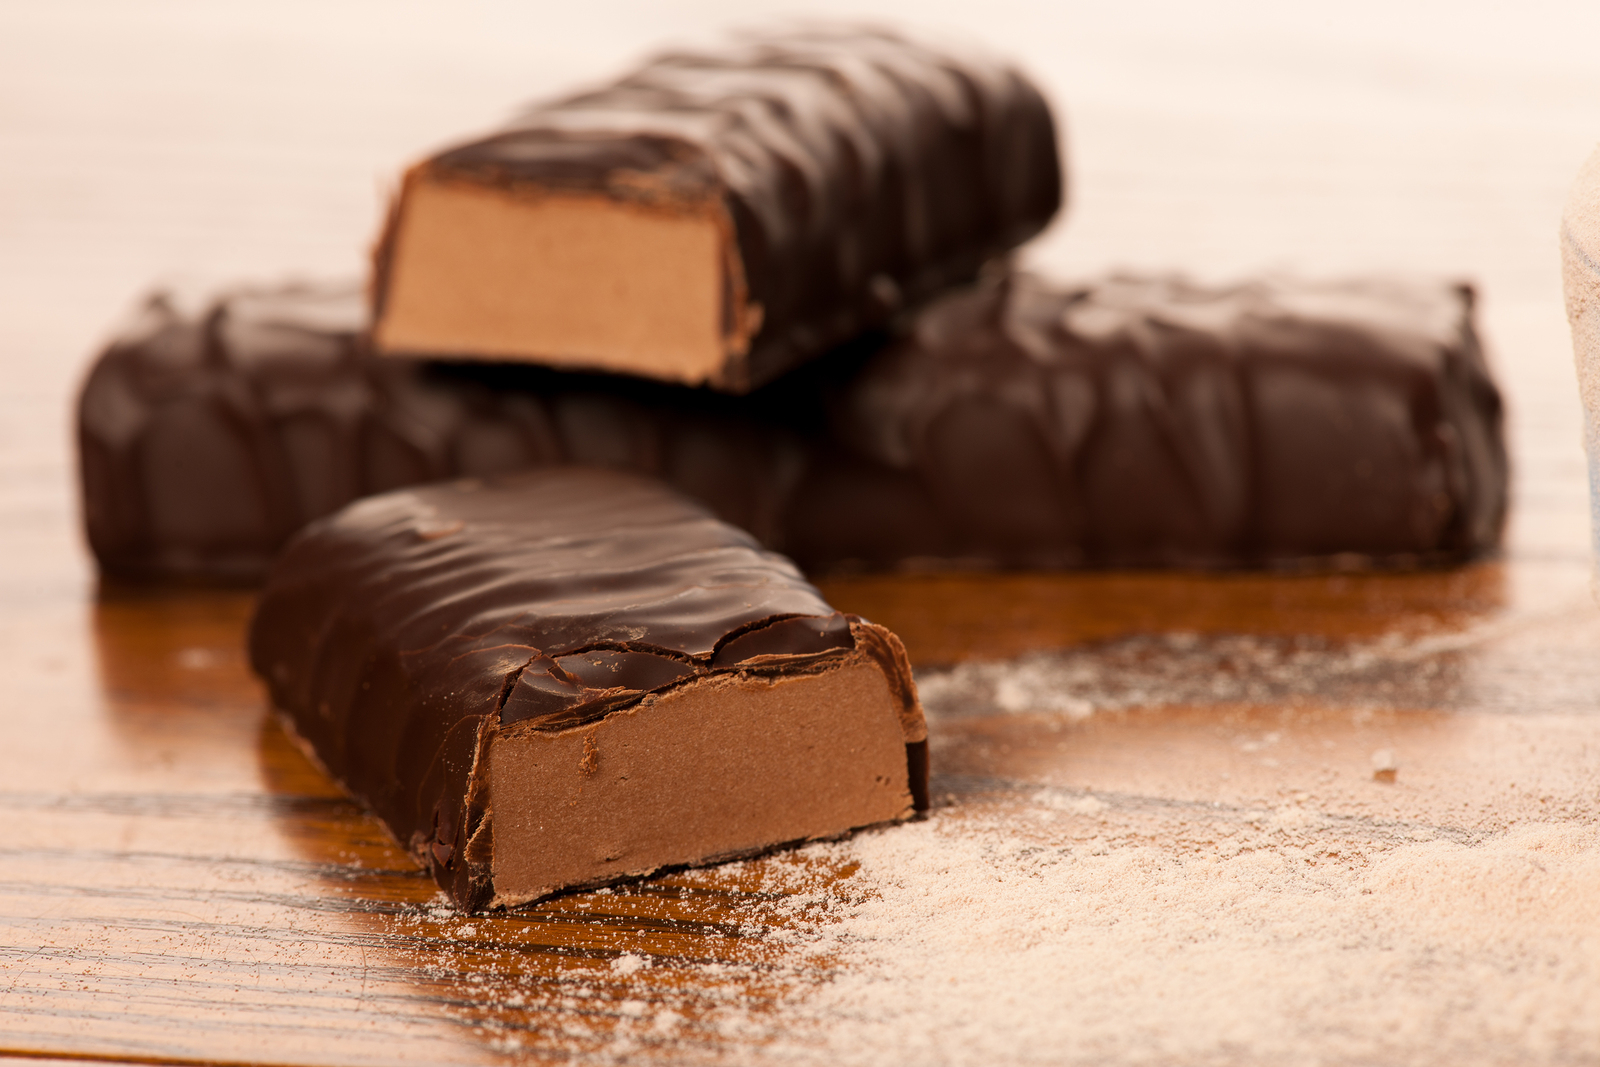 Whey protein powder and chocolate protein bar on wooden background.